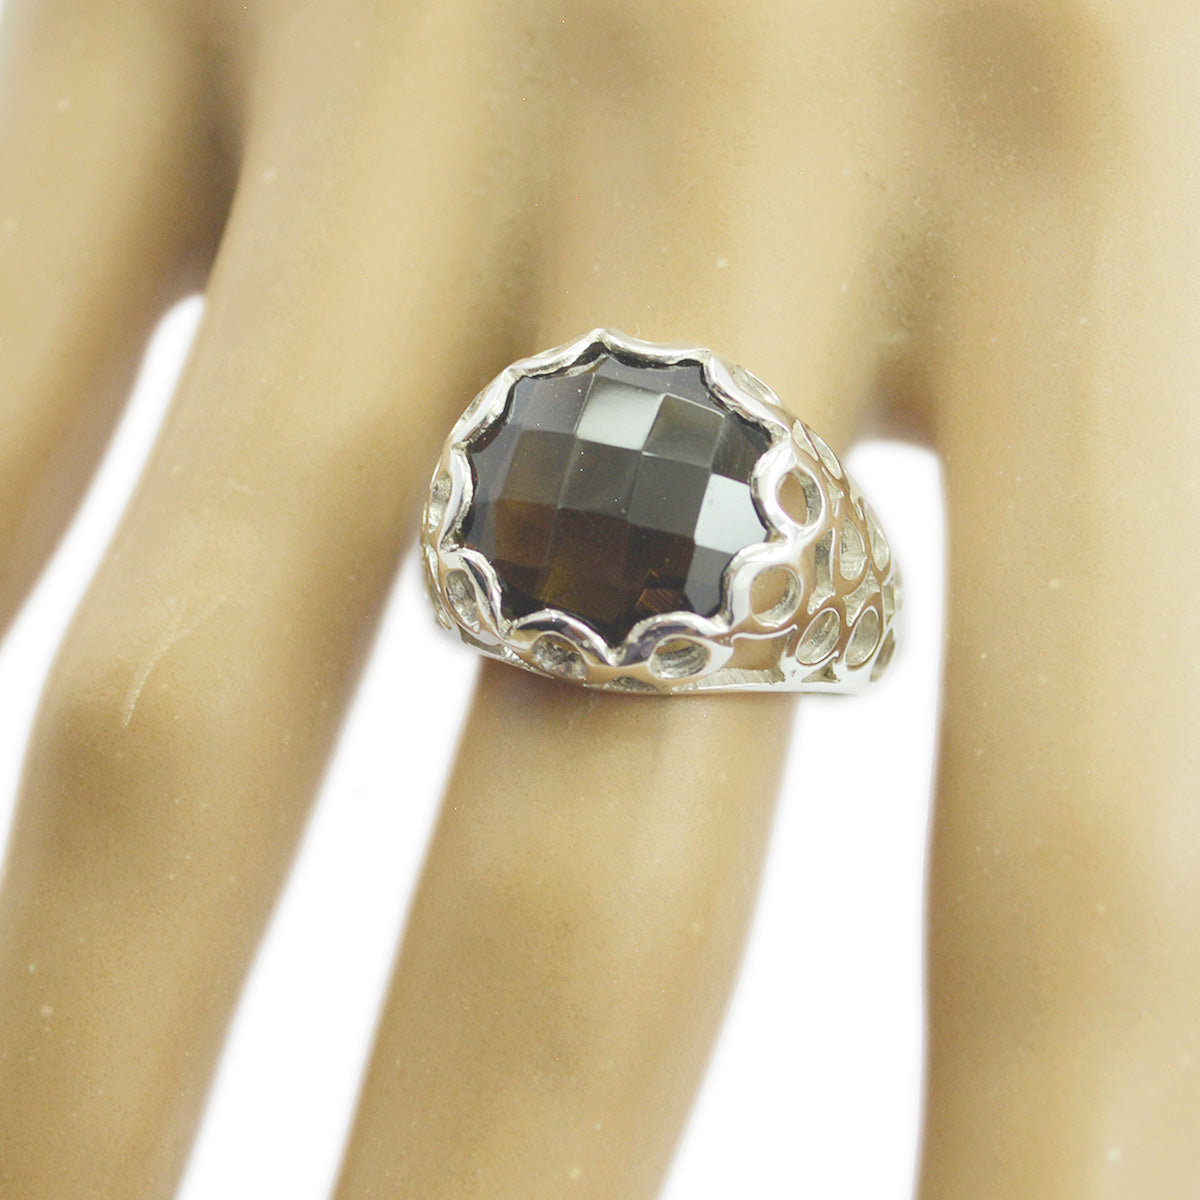 Bonnie Gems Smoky Quartz 925 Sterling Silver Rings Jewelry Packaging